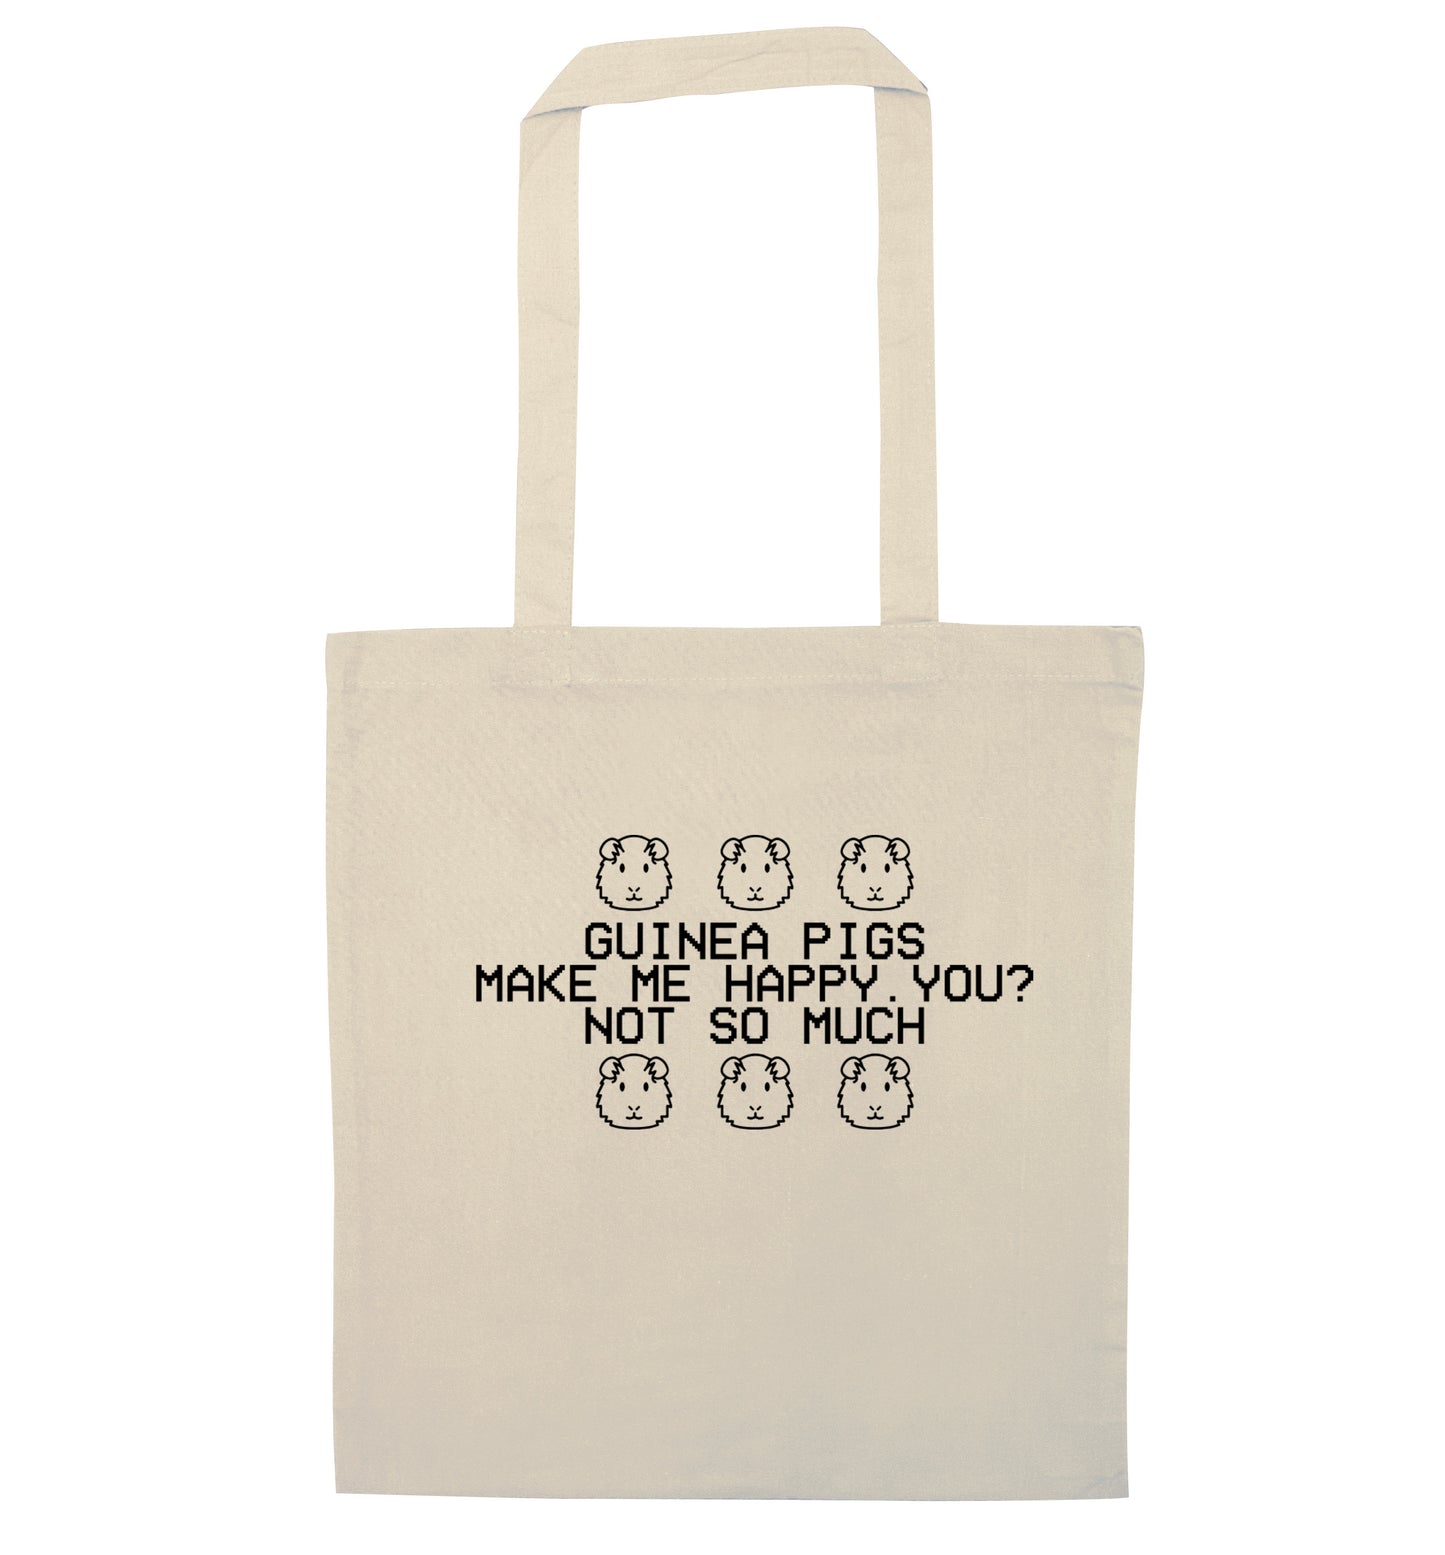 Guinea pigs make me happy, you not so much natural tote bag